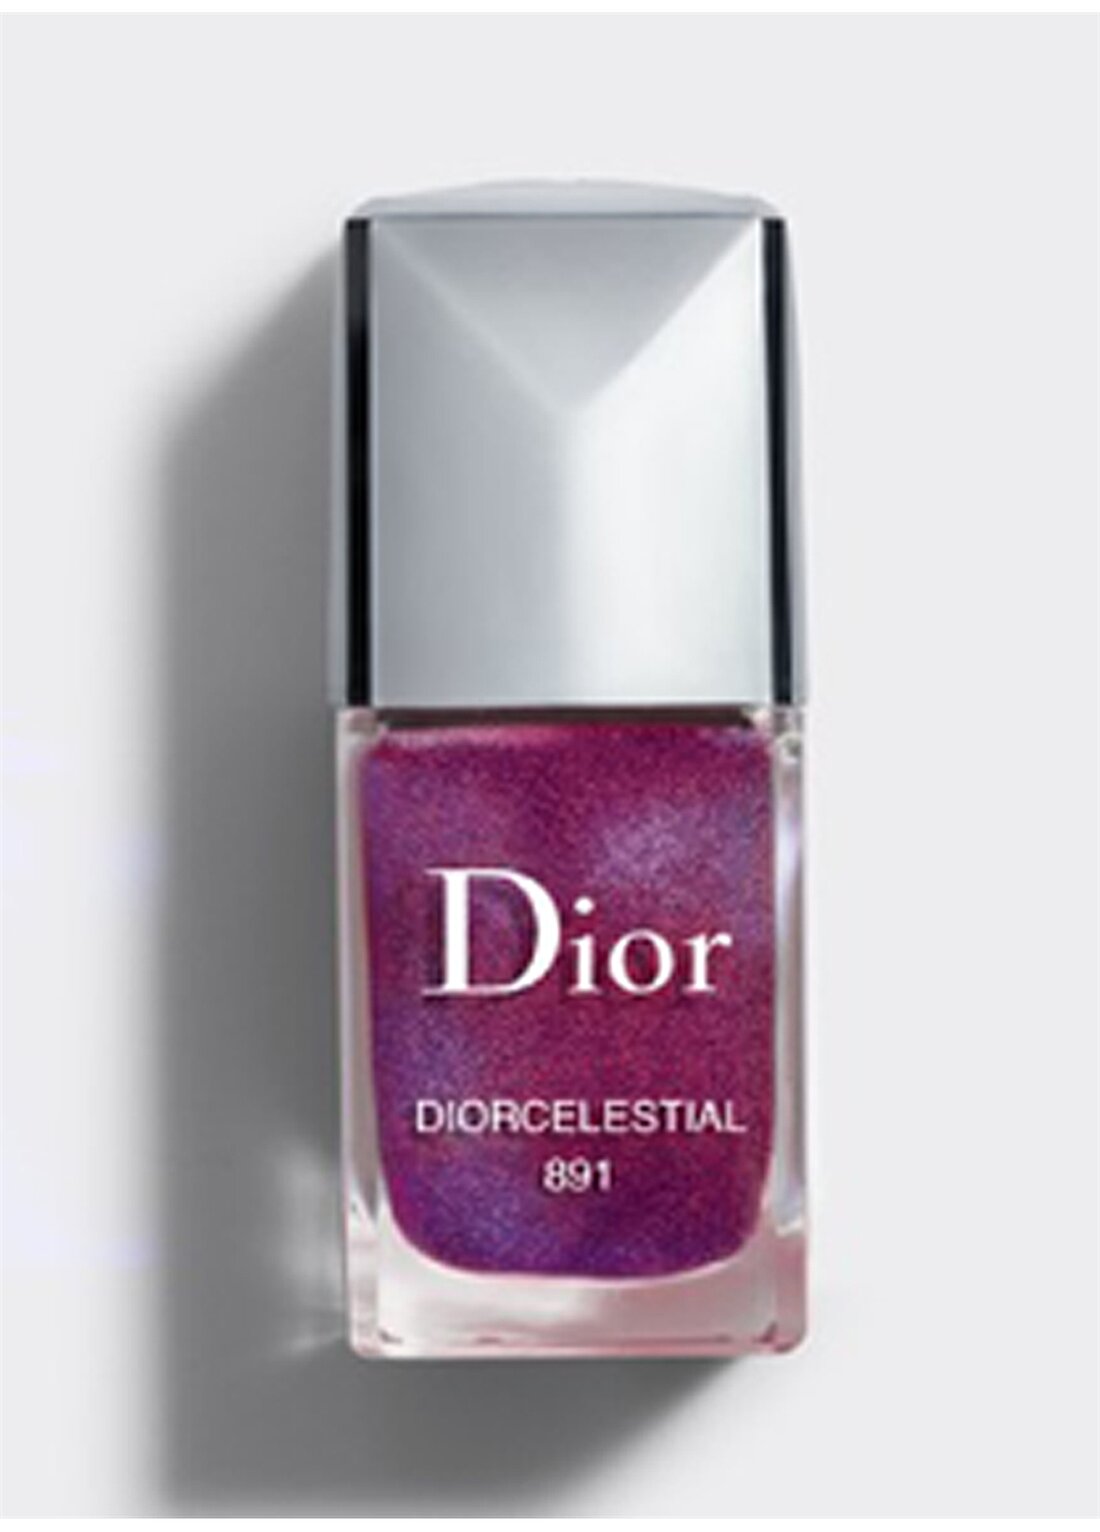 Dior Vernis Nail Lacquer- Diorcelestial 891 Oje